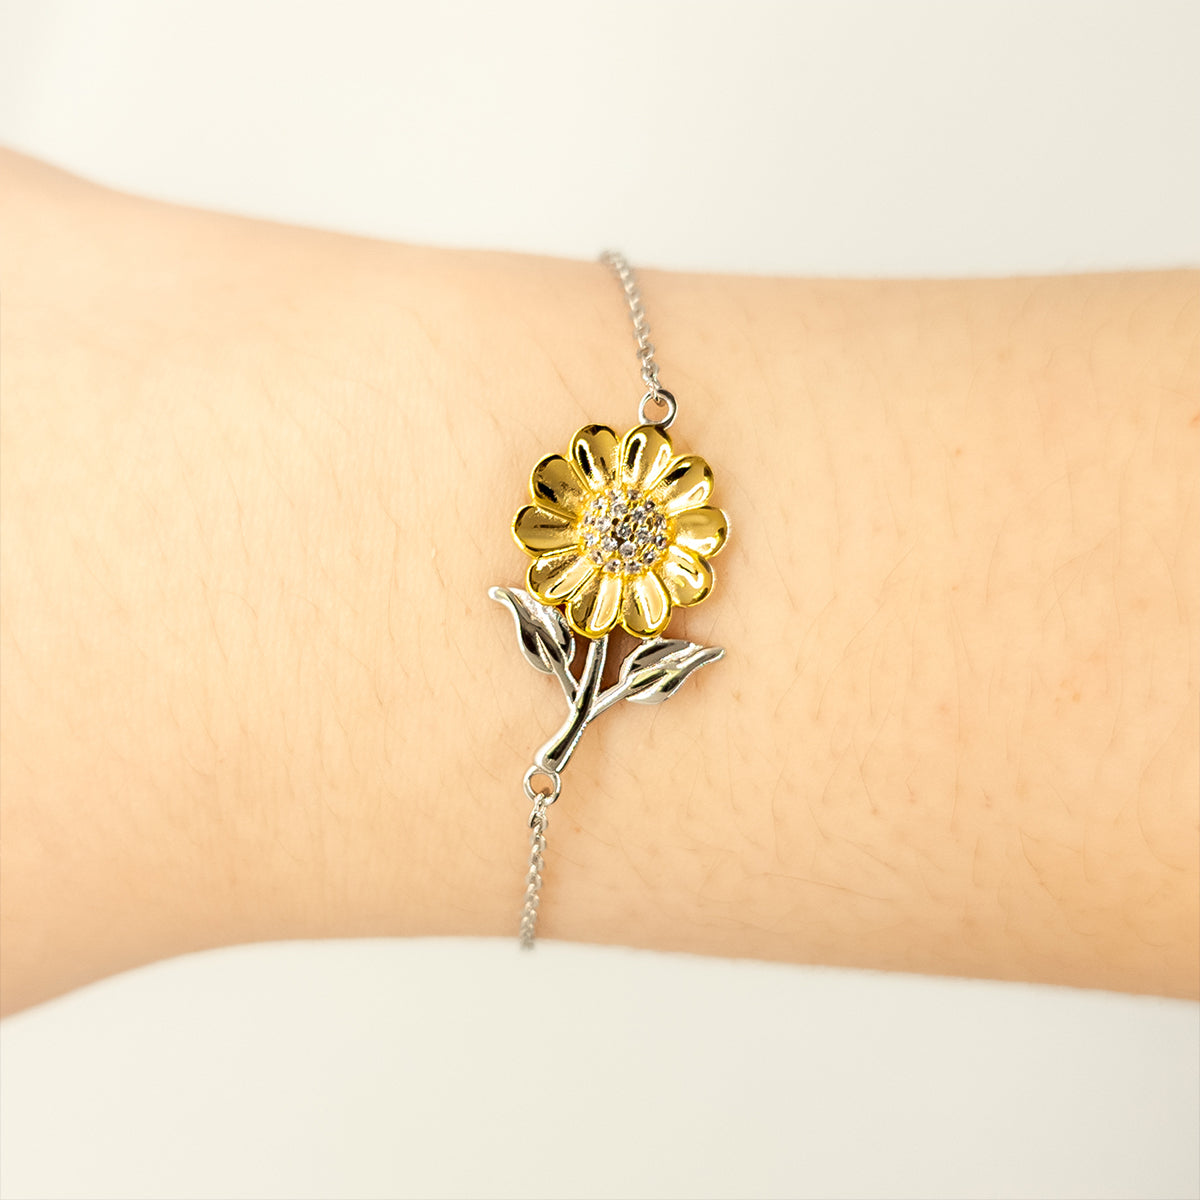 Funny X-Ray Technician Mom Gifts, The best kind of MOM raises X-Ray Technician, Birthday, Mother's Day, Cute Sunflower Bracelet for X-Ray Technician Mom